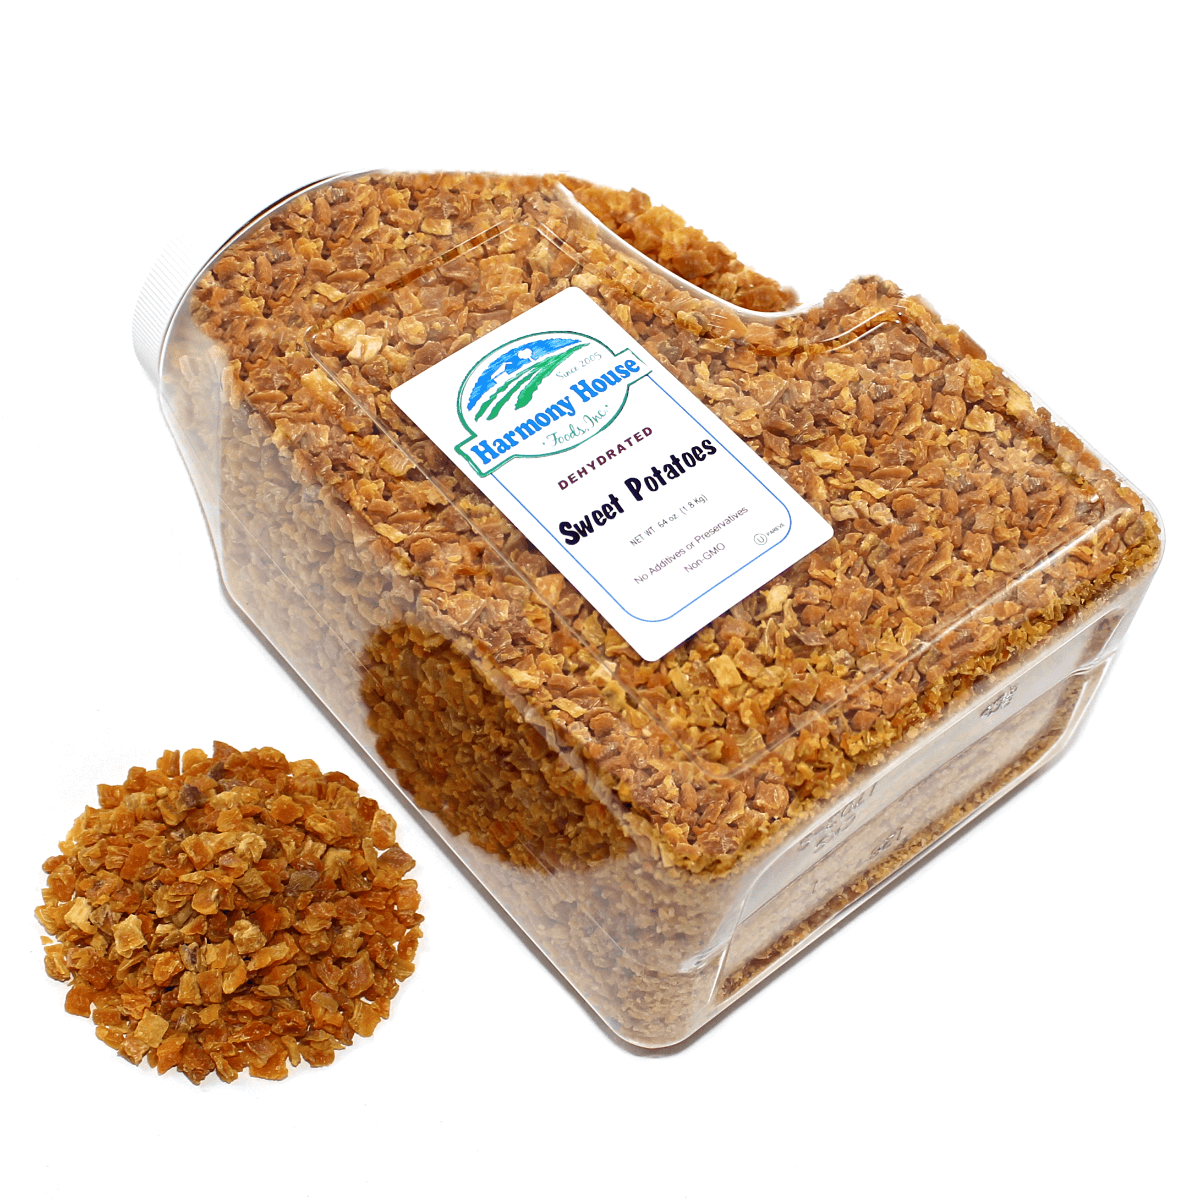 A container of granola with dried sweet potatoes in it.